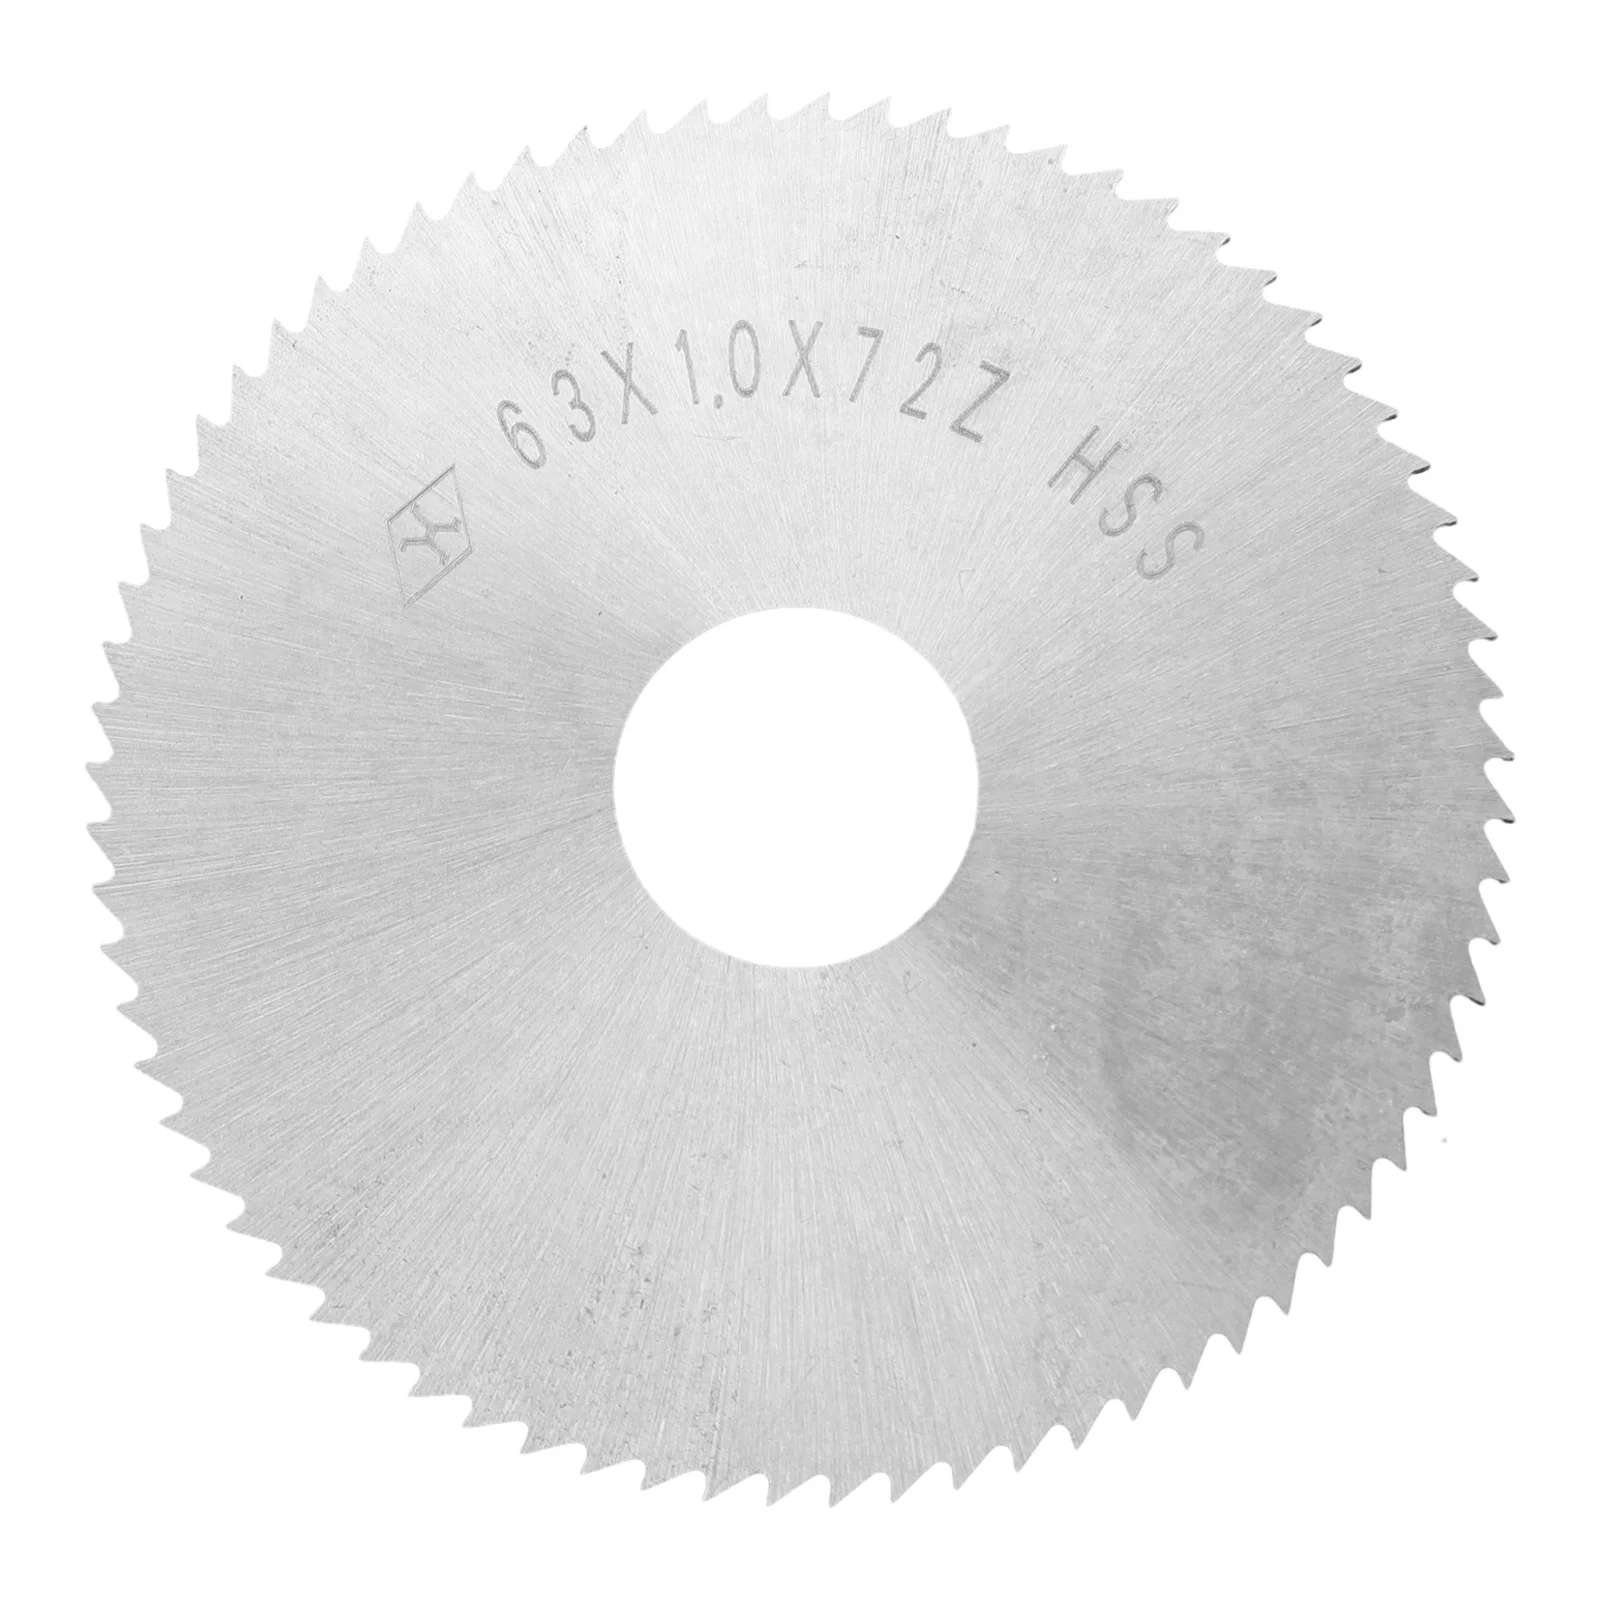 Fast Cutting Mm Bore Diameter Saw Blade Mm Bore Diameter Plastic Steel Jewelers Metals And Soft Other Light Copper air compressor fan blade replacement 0 5 inner bore 10 impeller direct on line motor 14mm shaft 135mm outer diameter fast ship